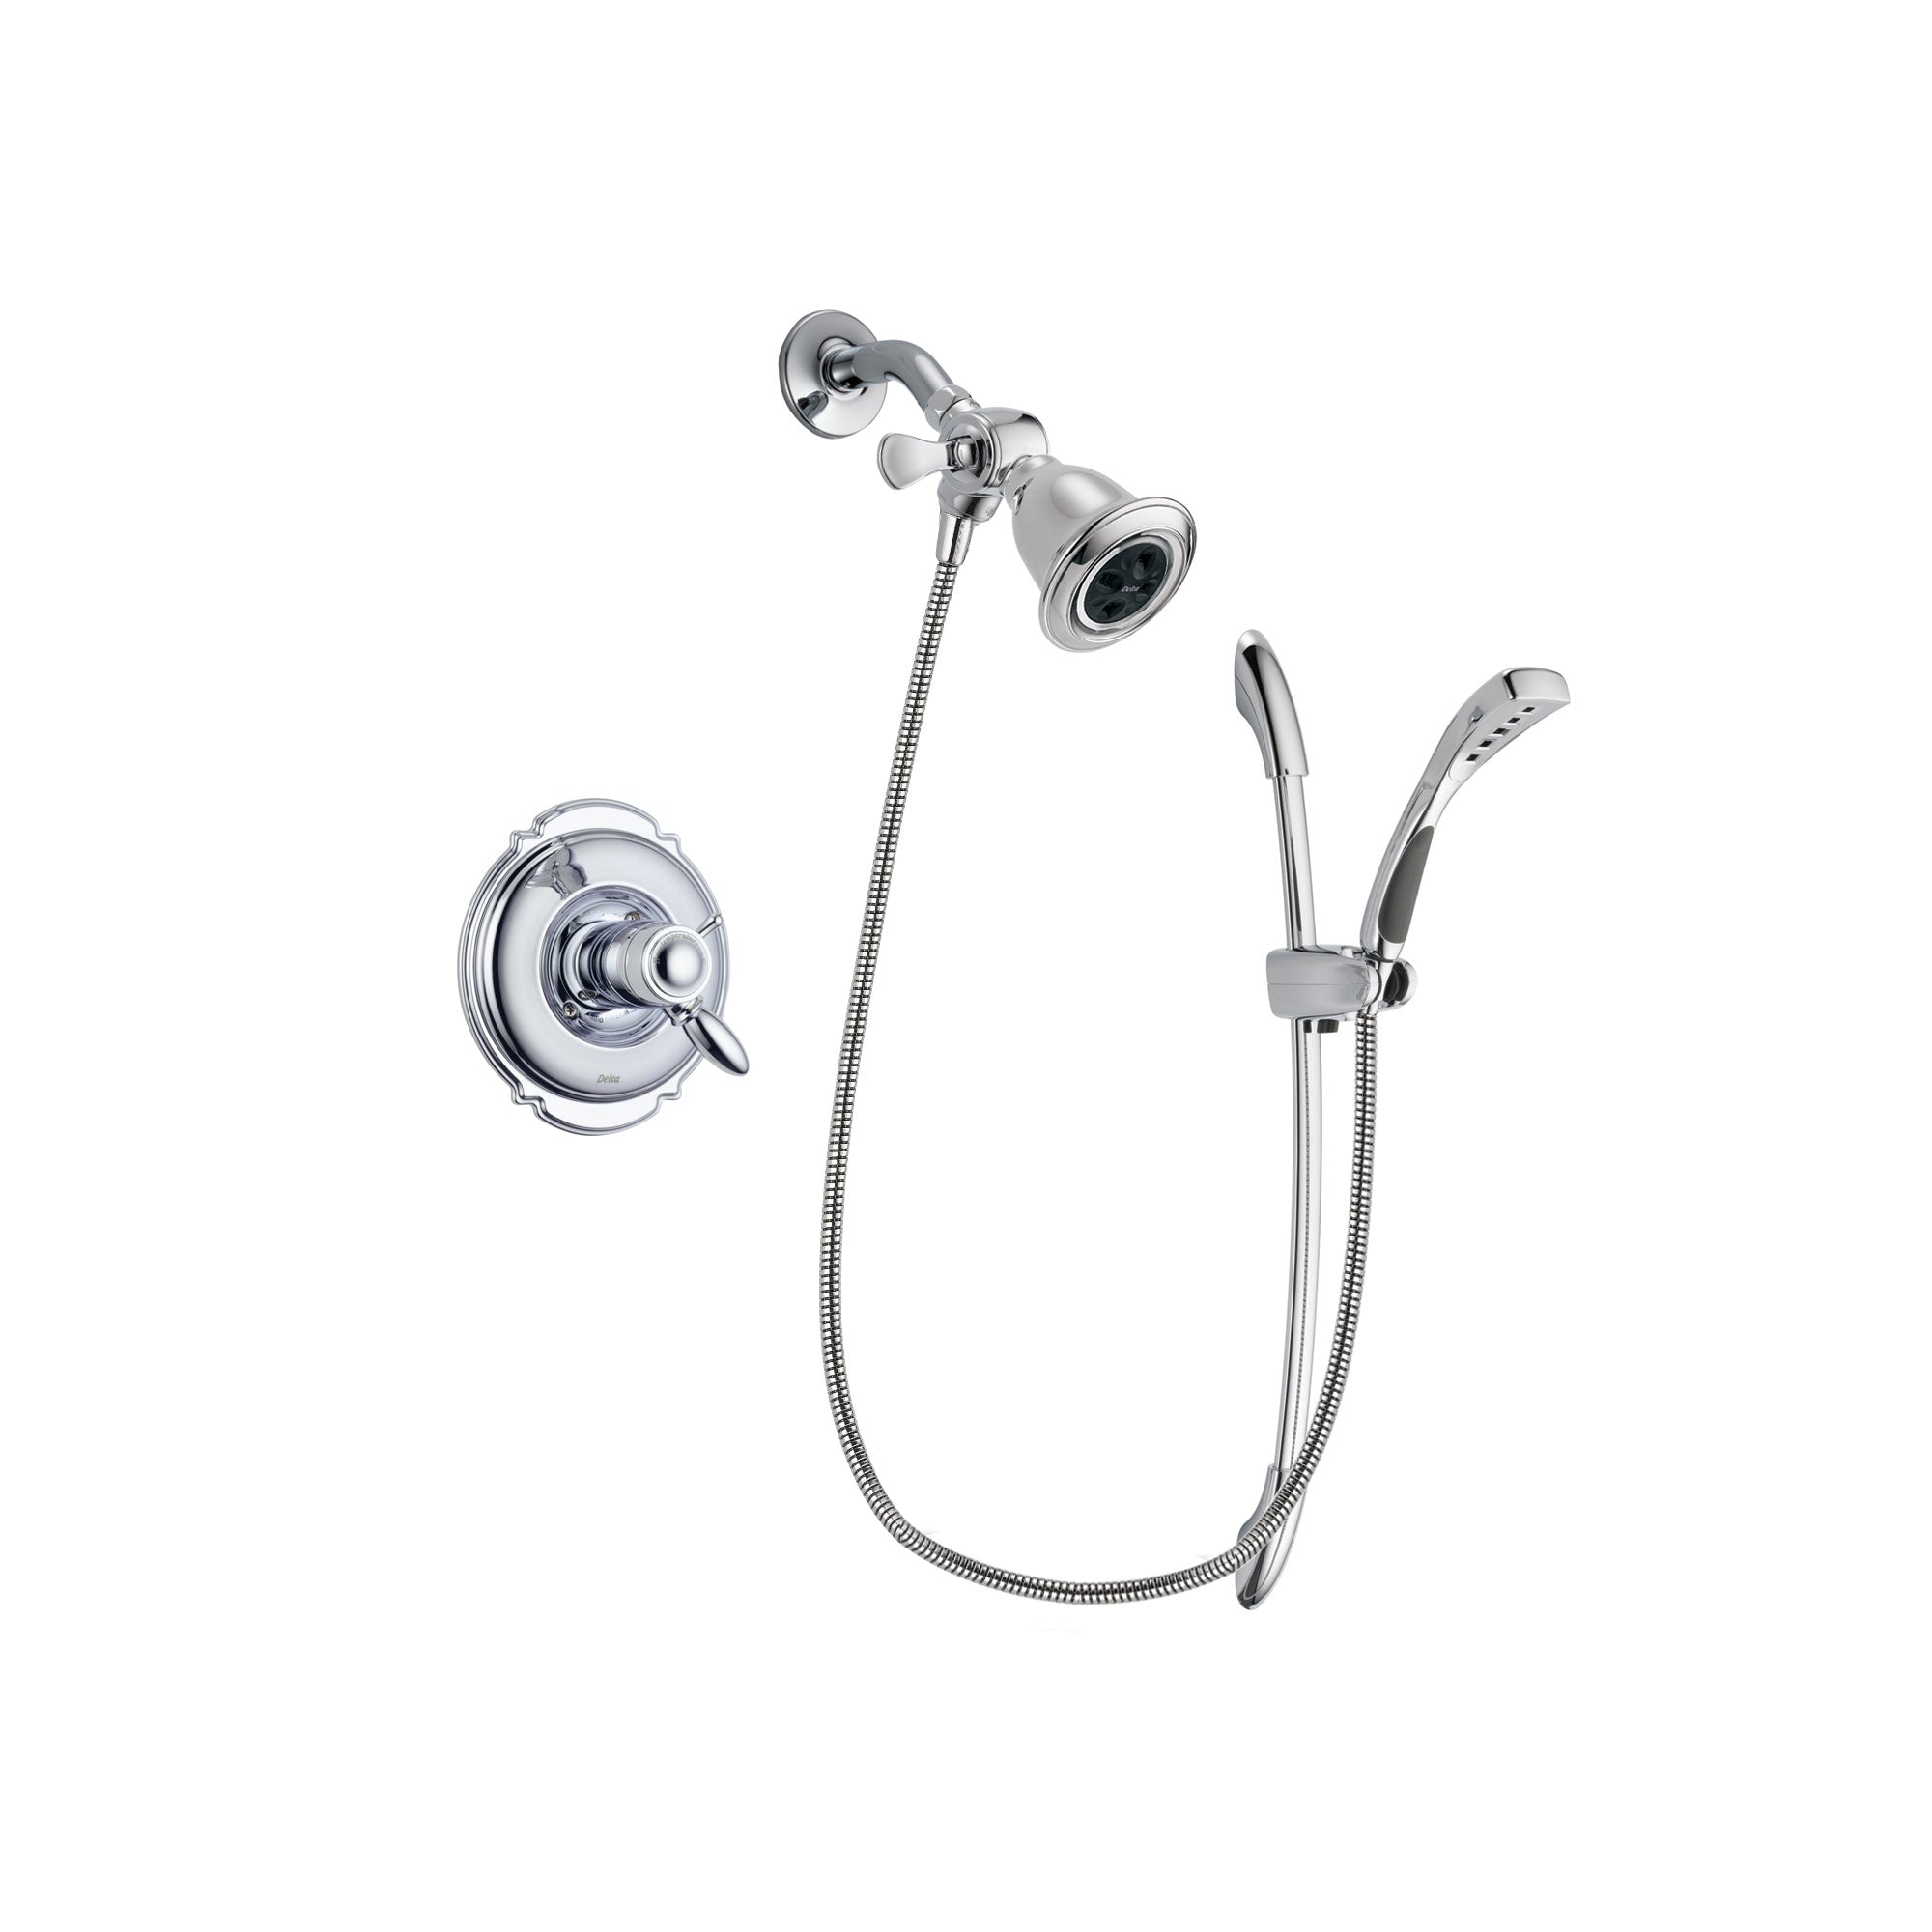 Delta Victorian Chrome Finish Thermostatic Shower Faucet System Package with Water Efficient Showerhead and Handheld Shower with Slide Bar Includes Rough-in Valve DSP0462V